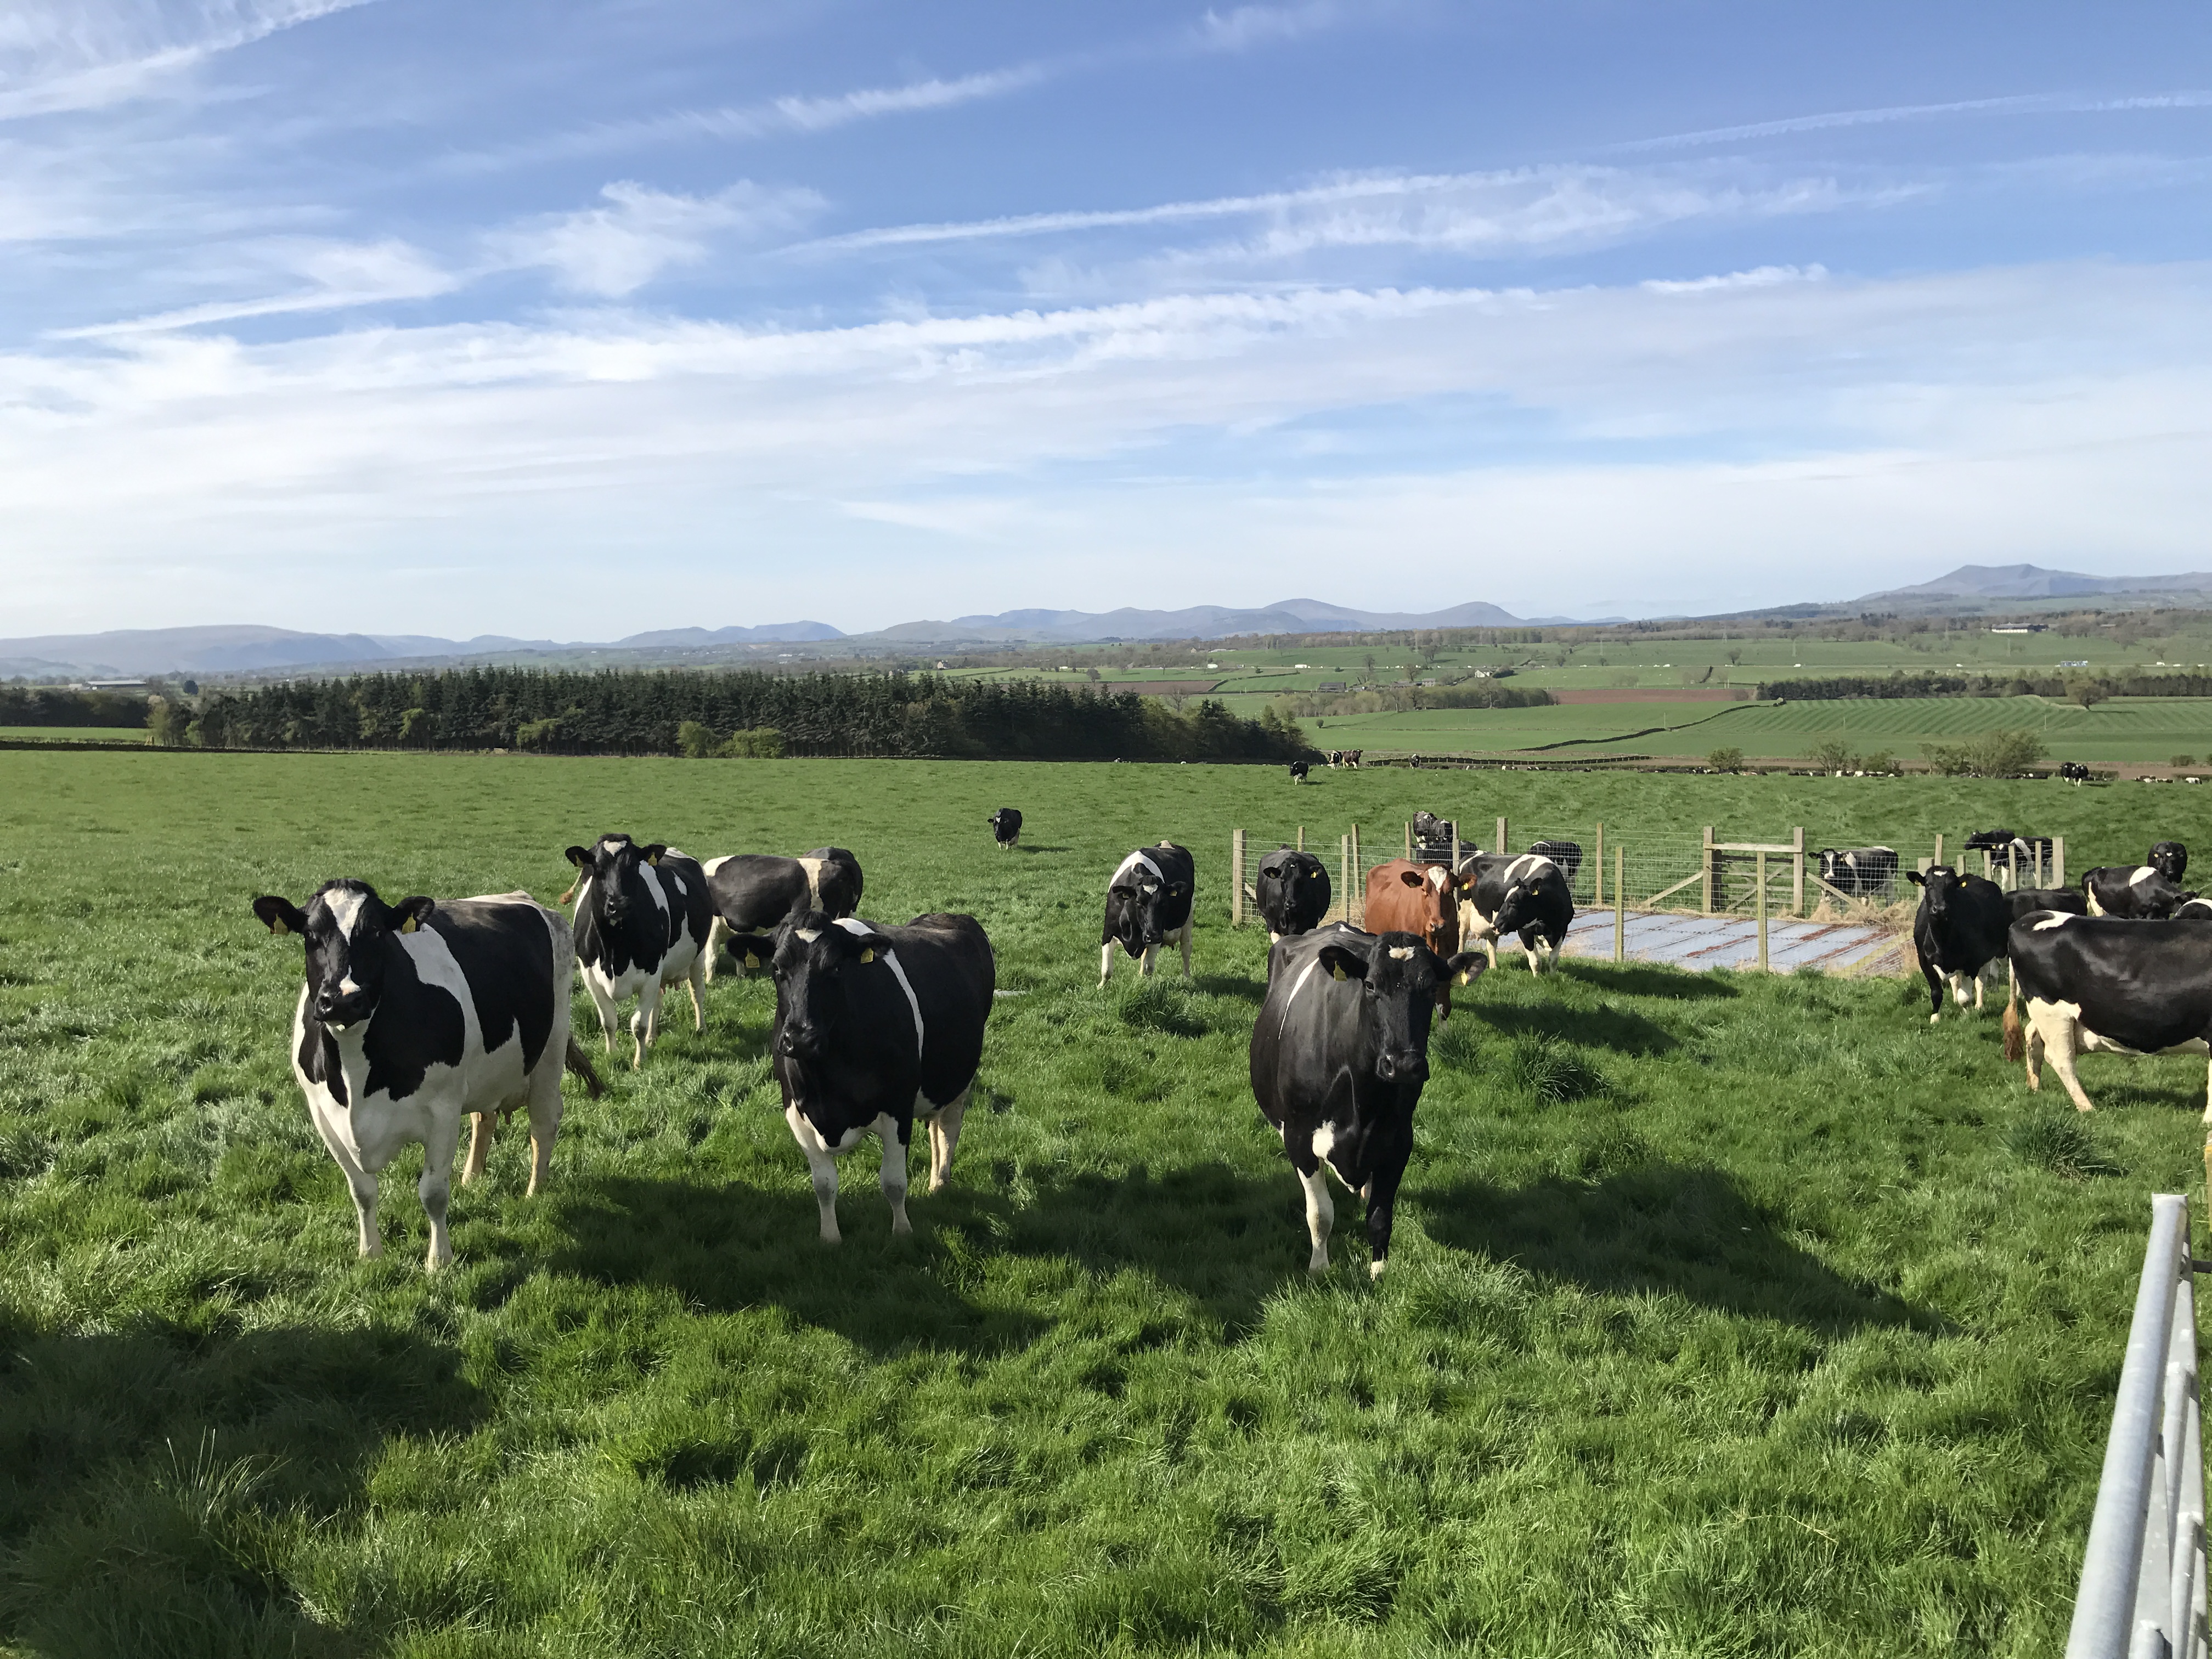 turnout time for the 2017 season happy cows = healthy cows